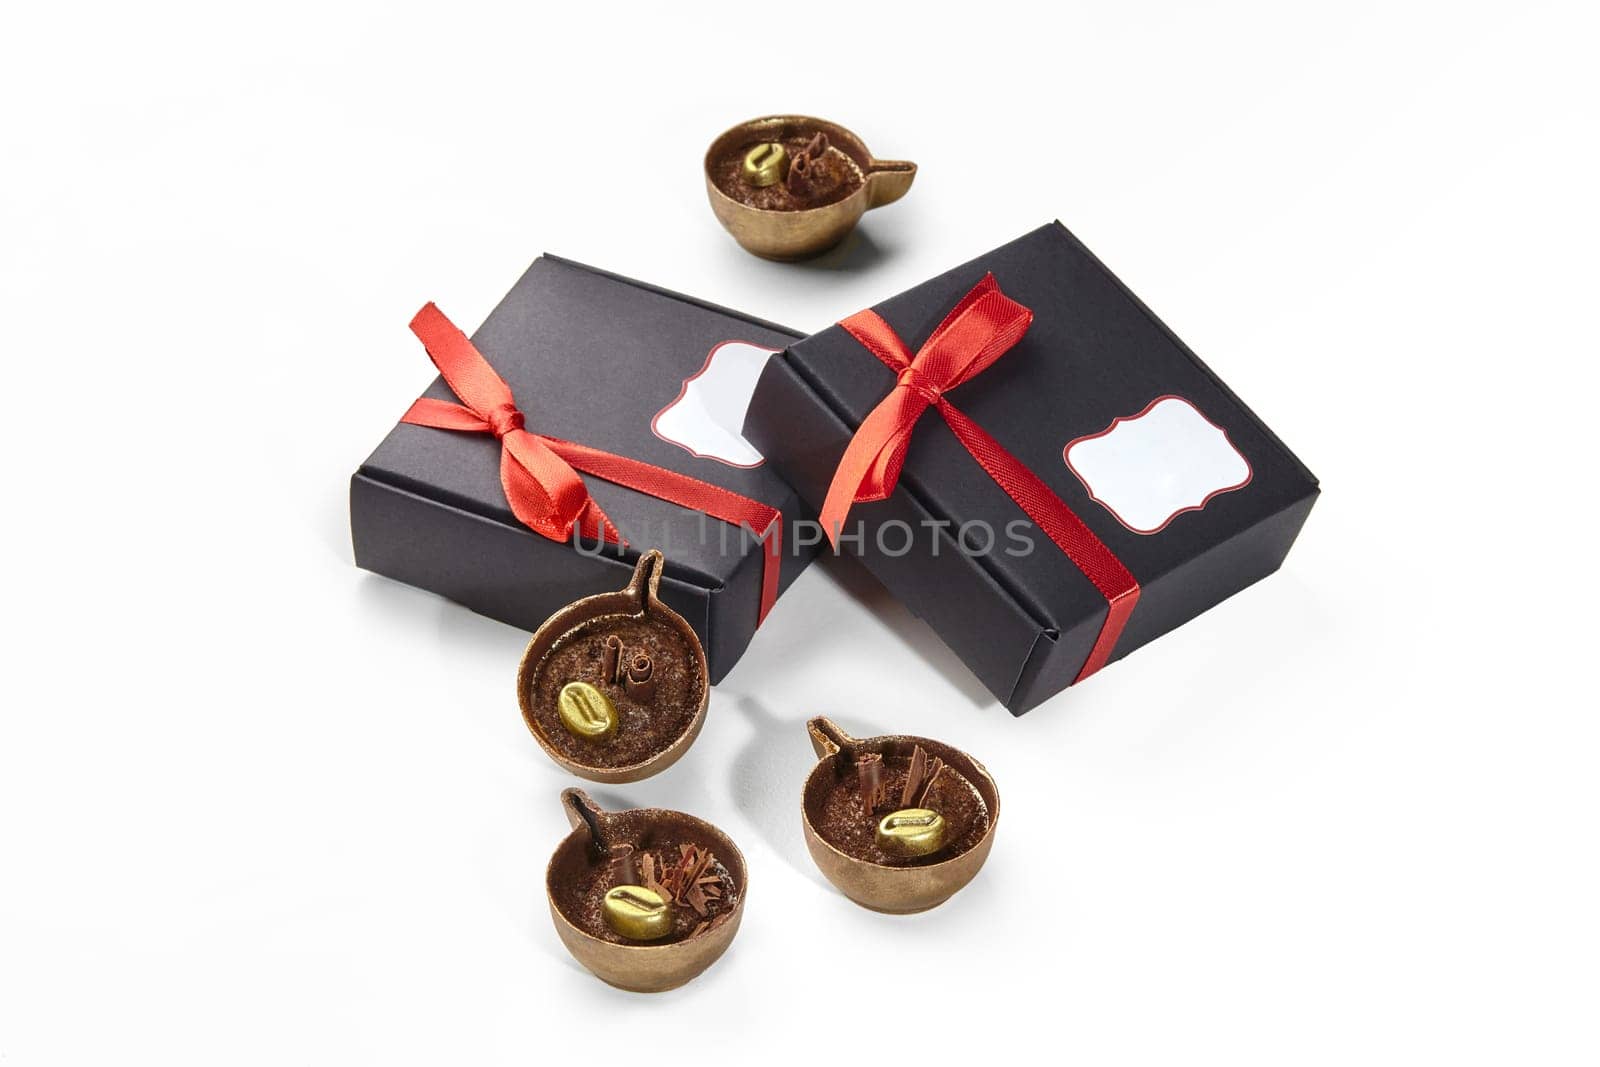 Chocolate candies in shape of miniature coffee cups in gift boxes by nazarovsergey